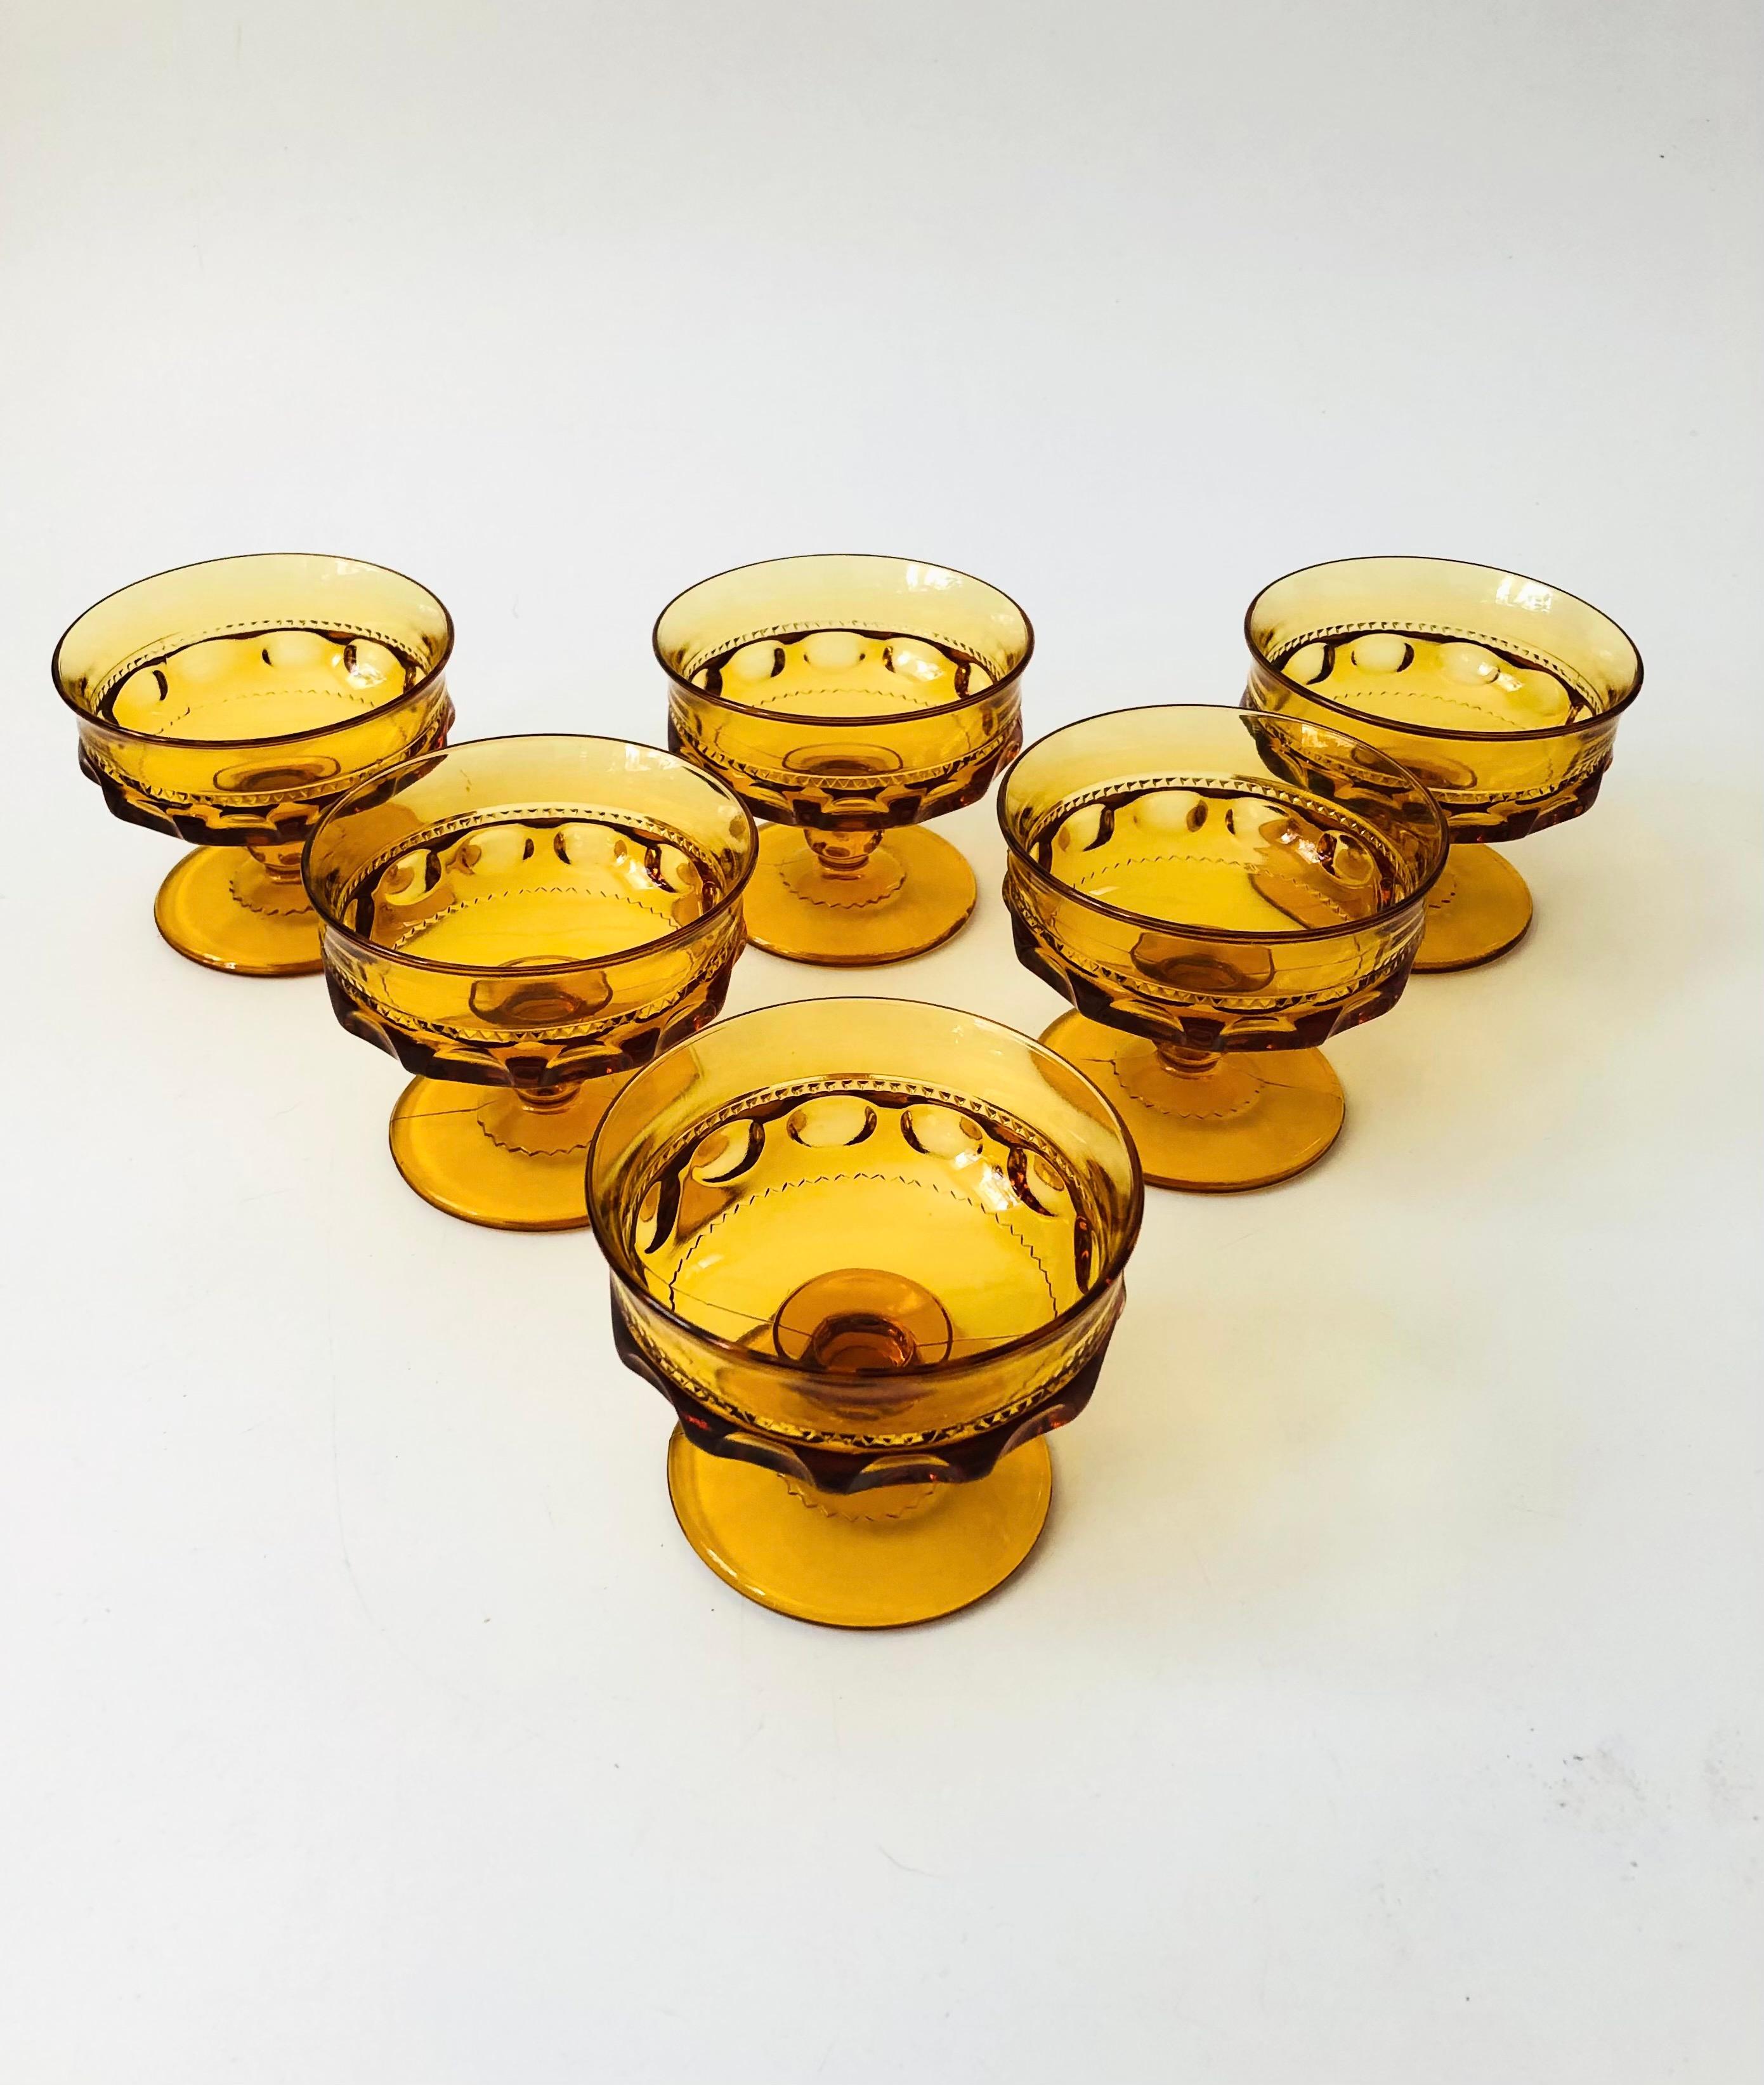 A set of 6 gorgeous coupe glasses with a lovely ornate design in amber glass. Made in the King's Crown pattern by Indiana Glass. Perfect for champagne, wine, or cocktails.